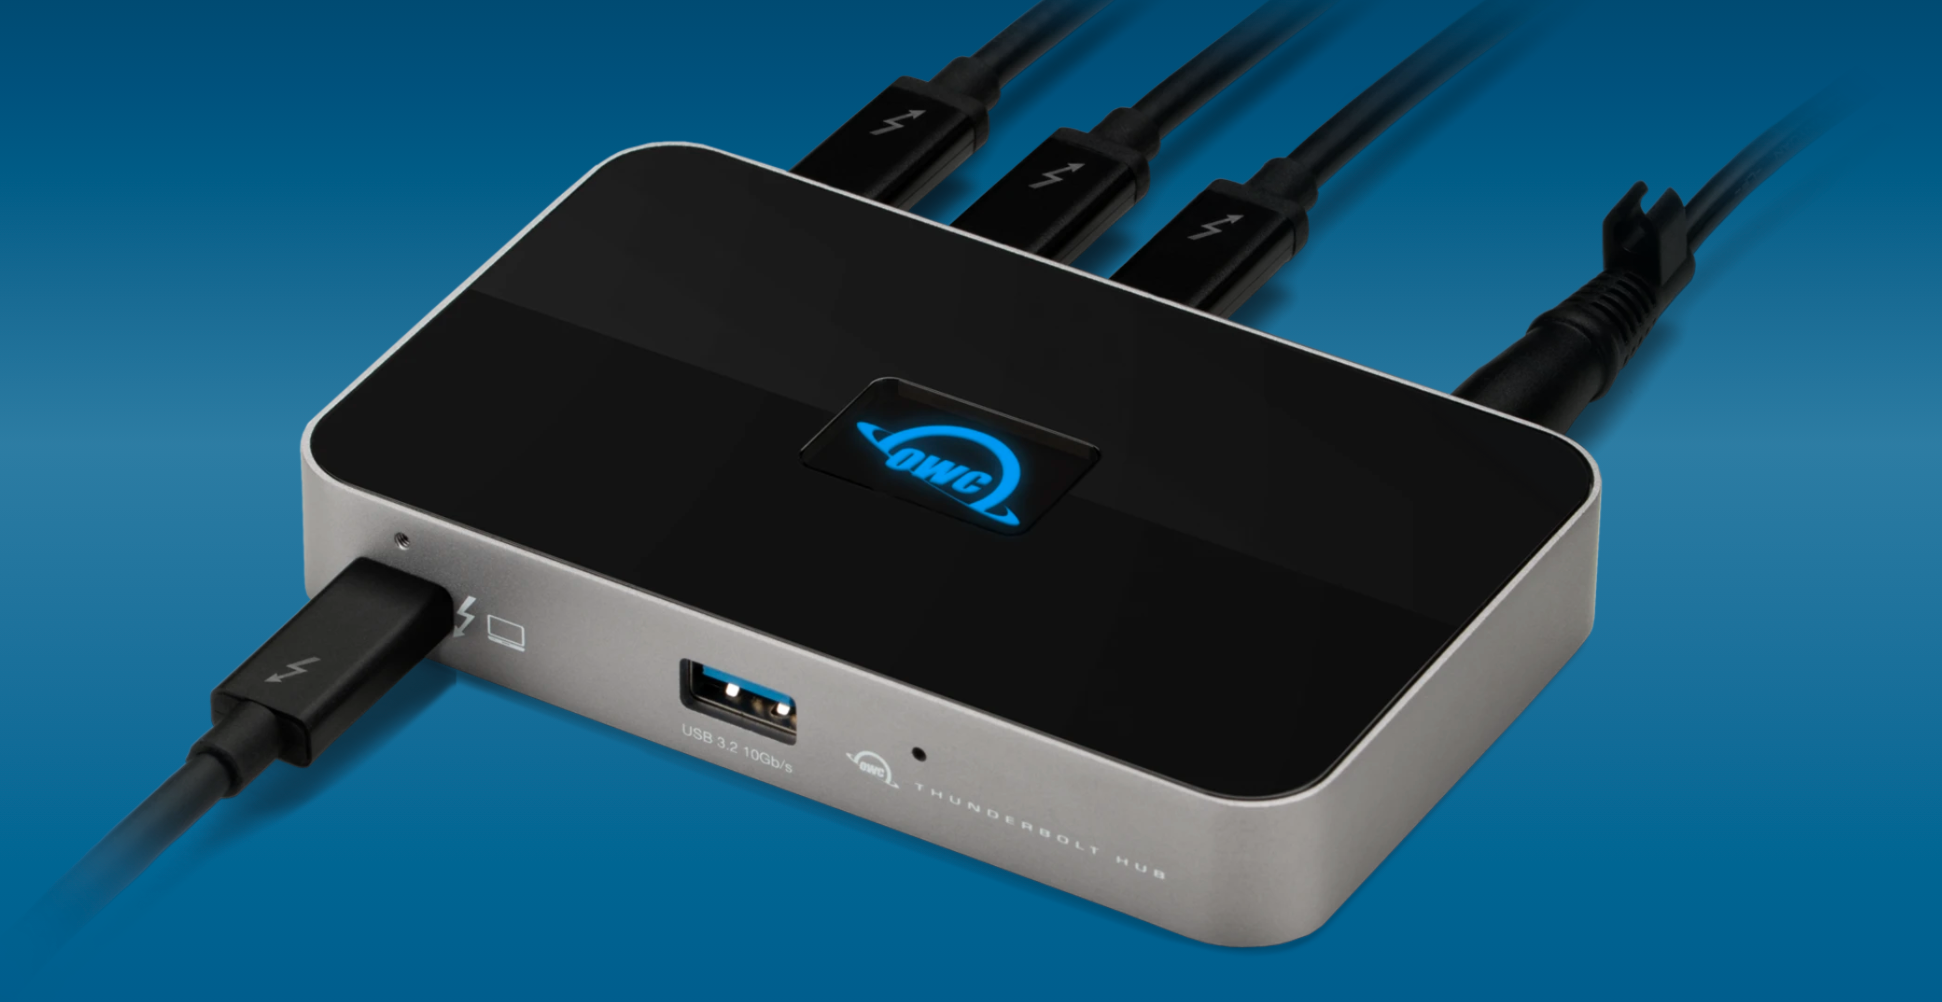 intel thunderbolt 3 secure connect software